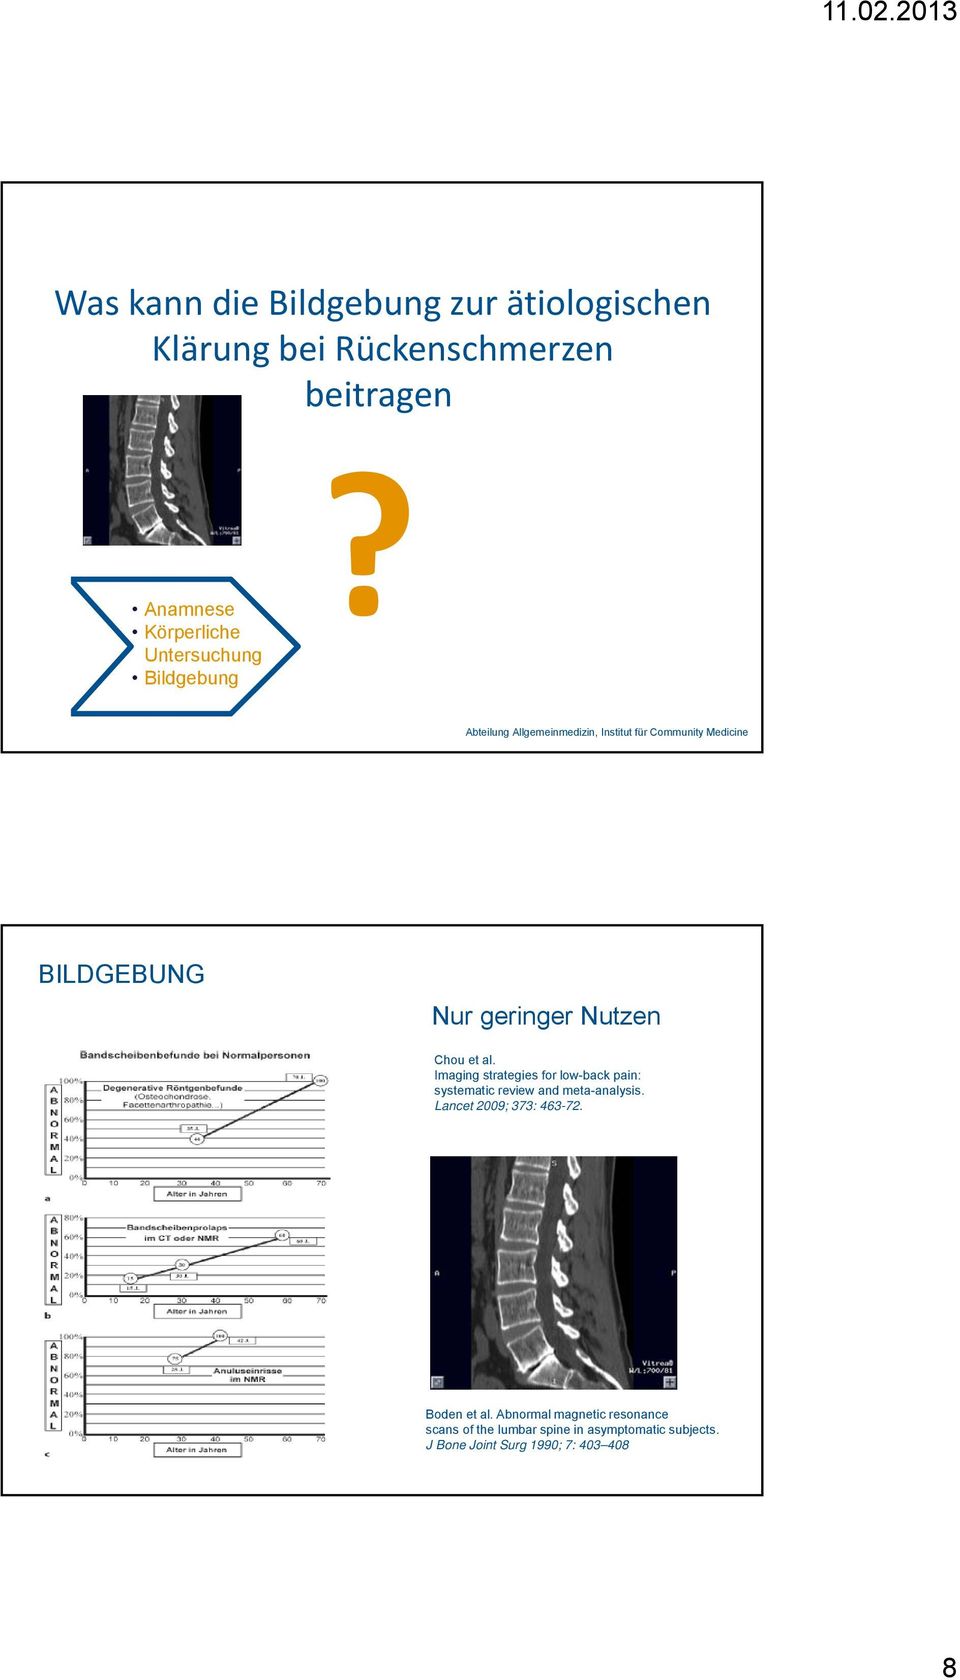 Imaging strategies for low-back pain: systematic review and meta-analysis. Lancet 2009; 373: 463-72.